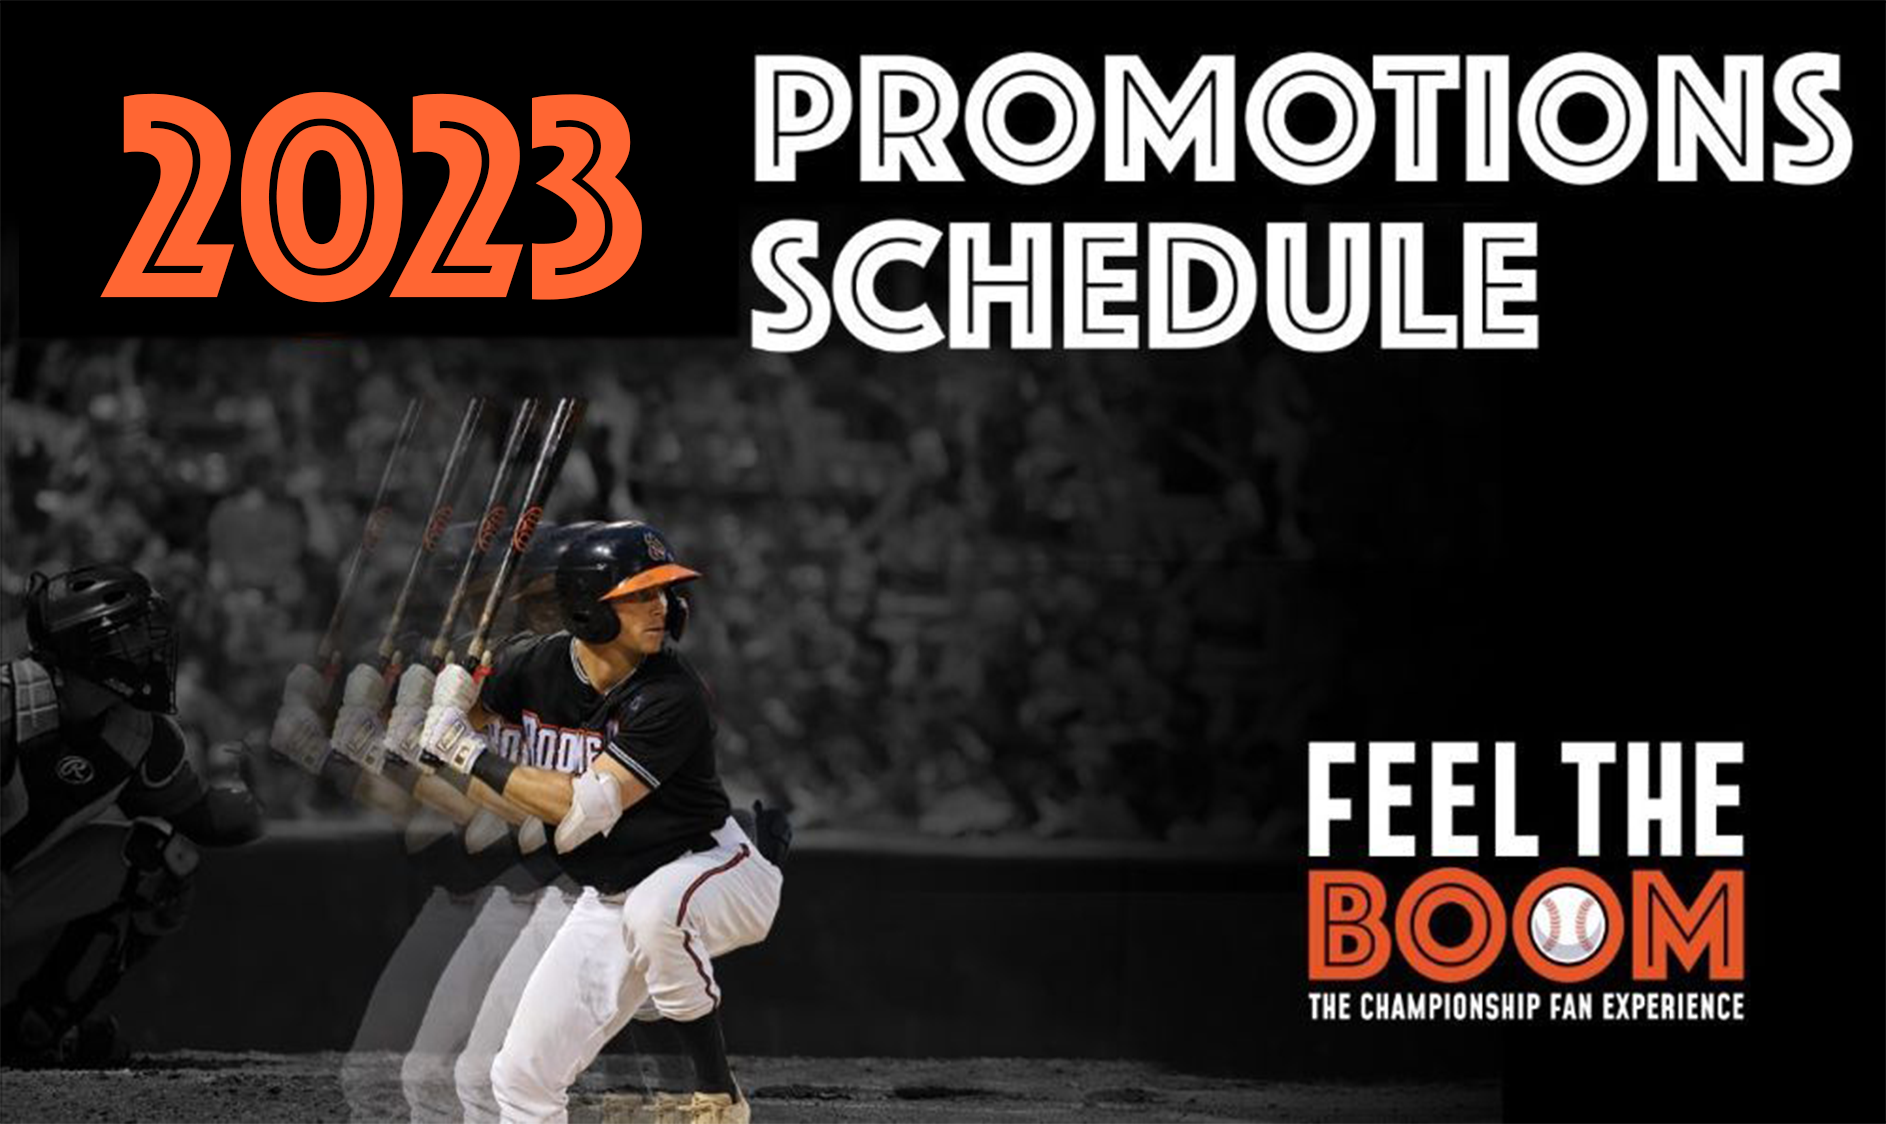 2023 Promotions Schedule